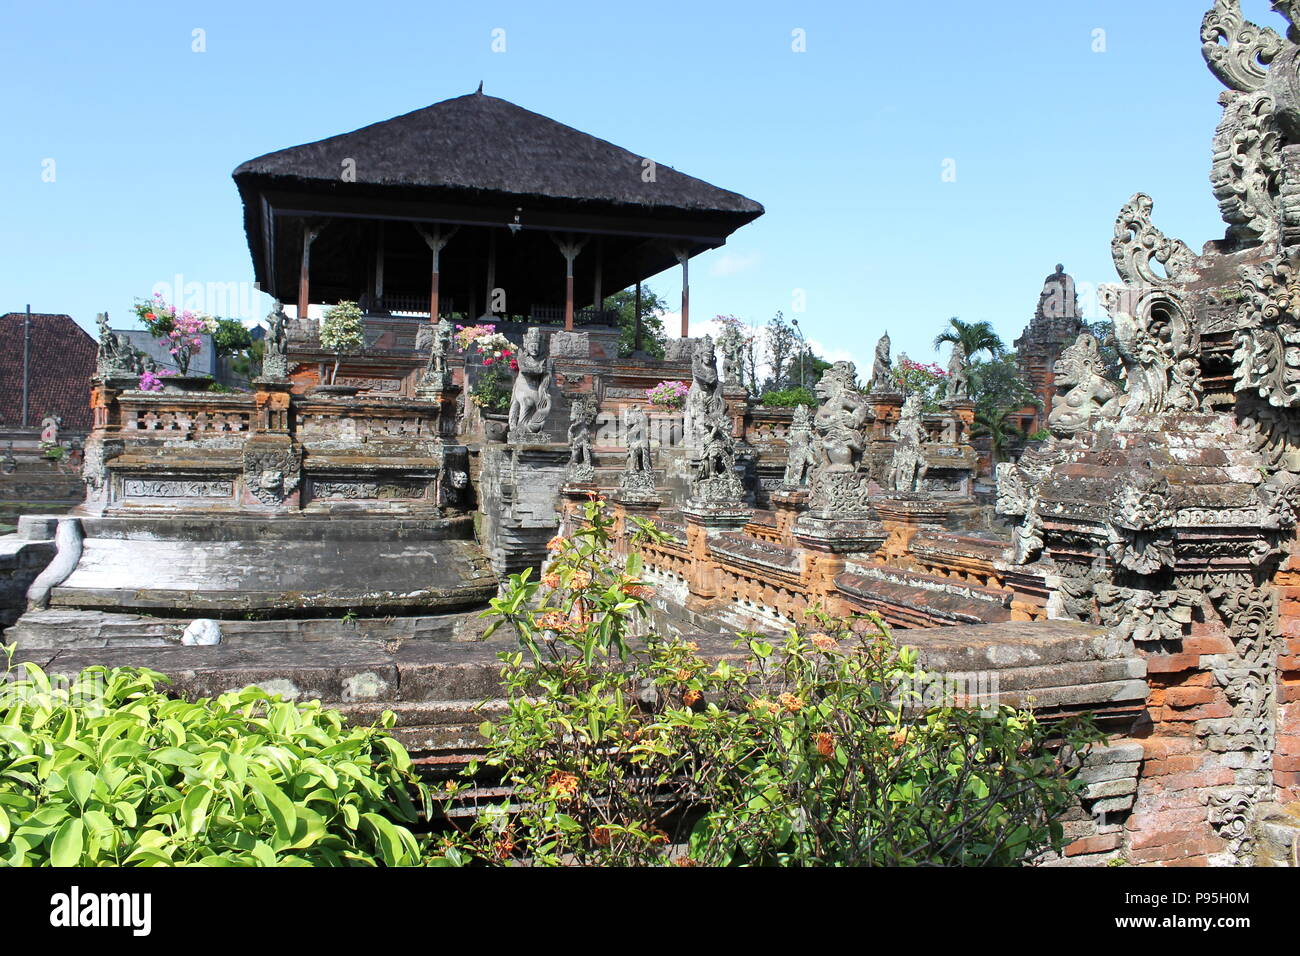 Klungkung Palace in Bali Stock Photo